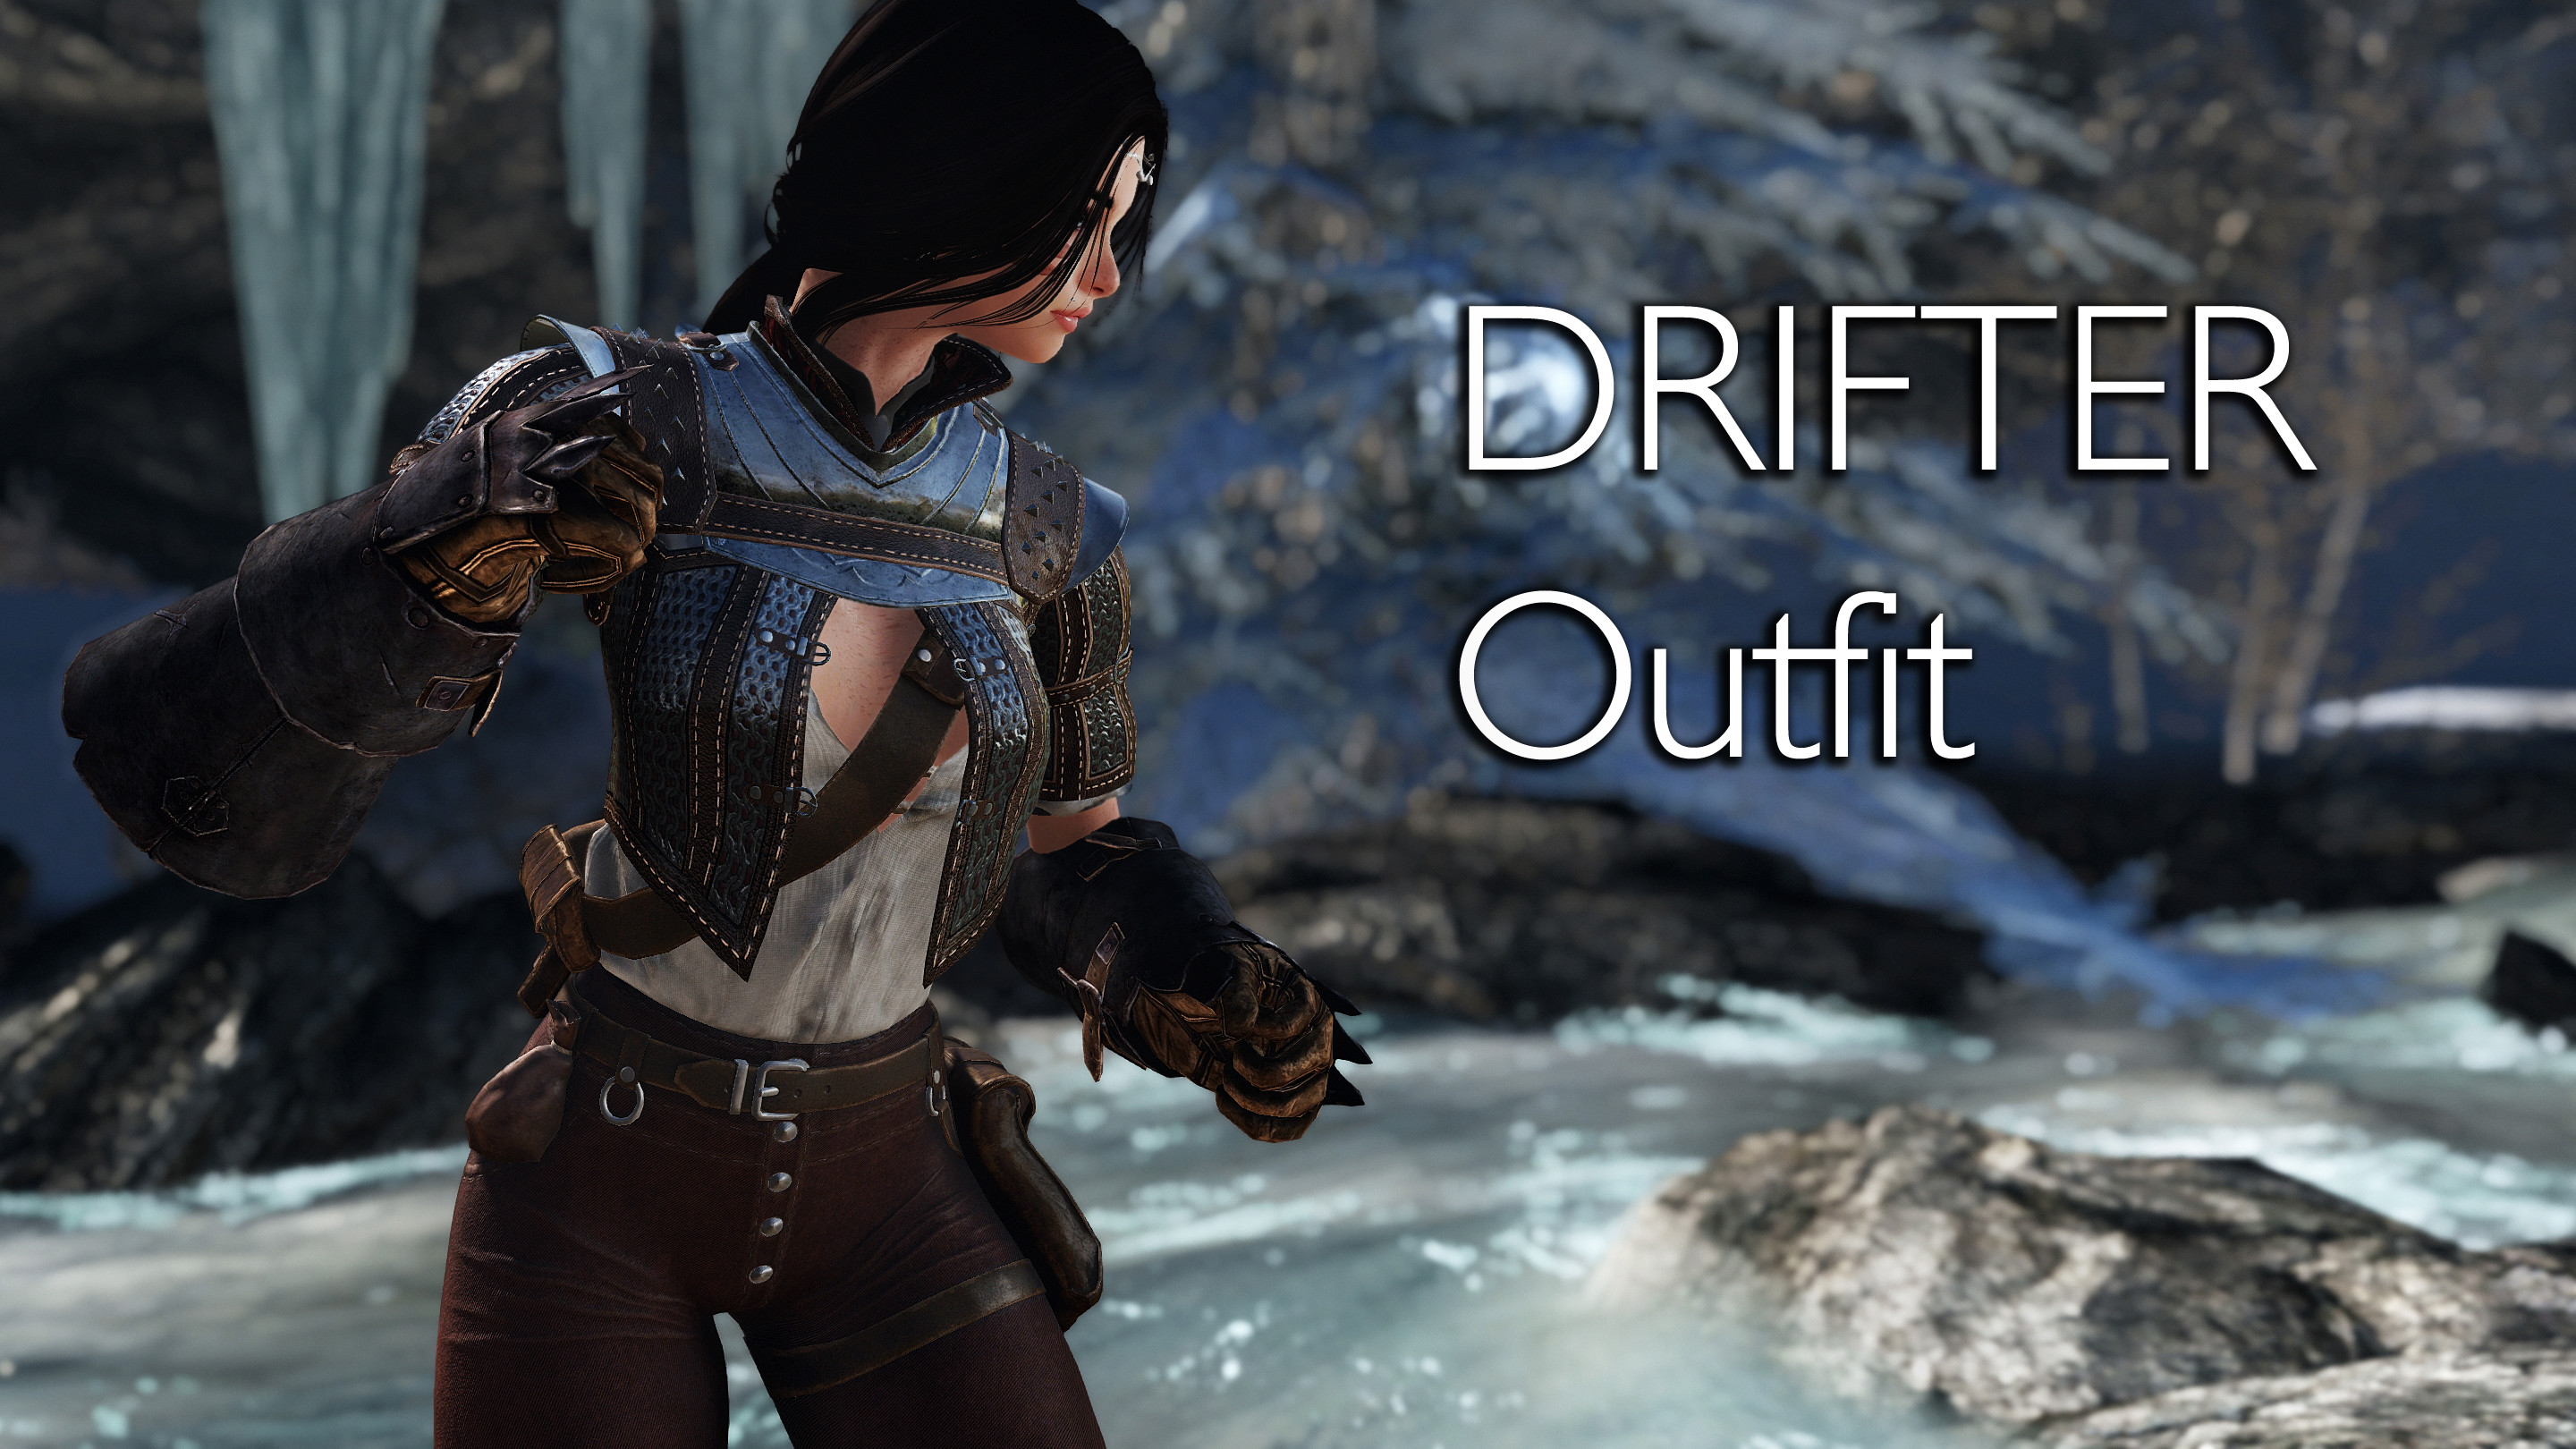 Drifter Armor and Outfit - My version